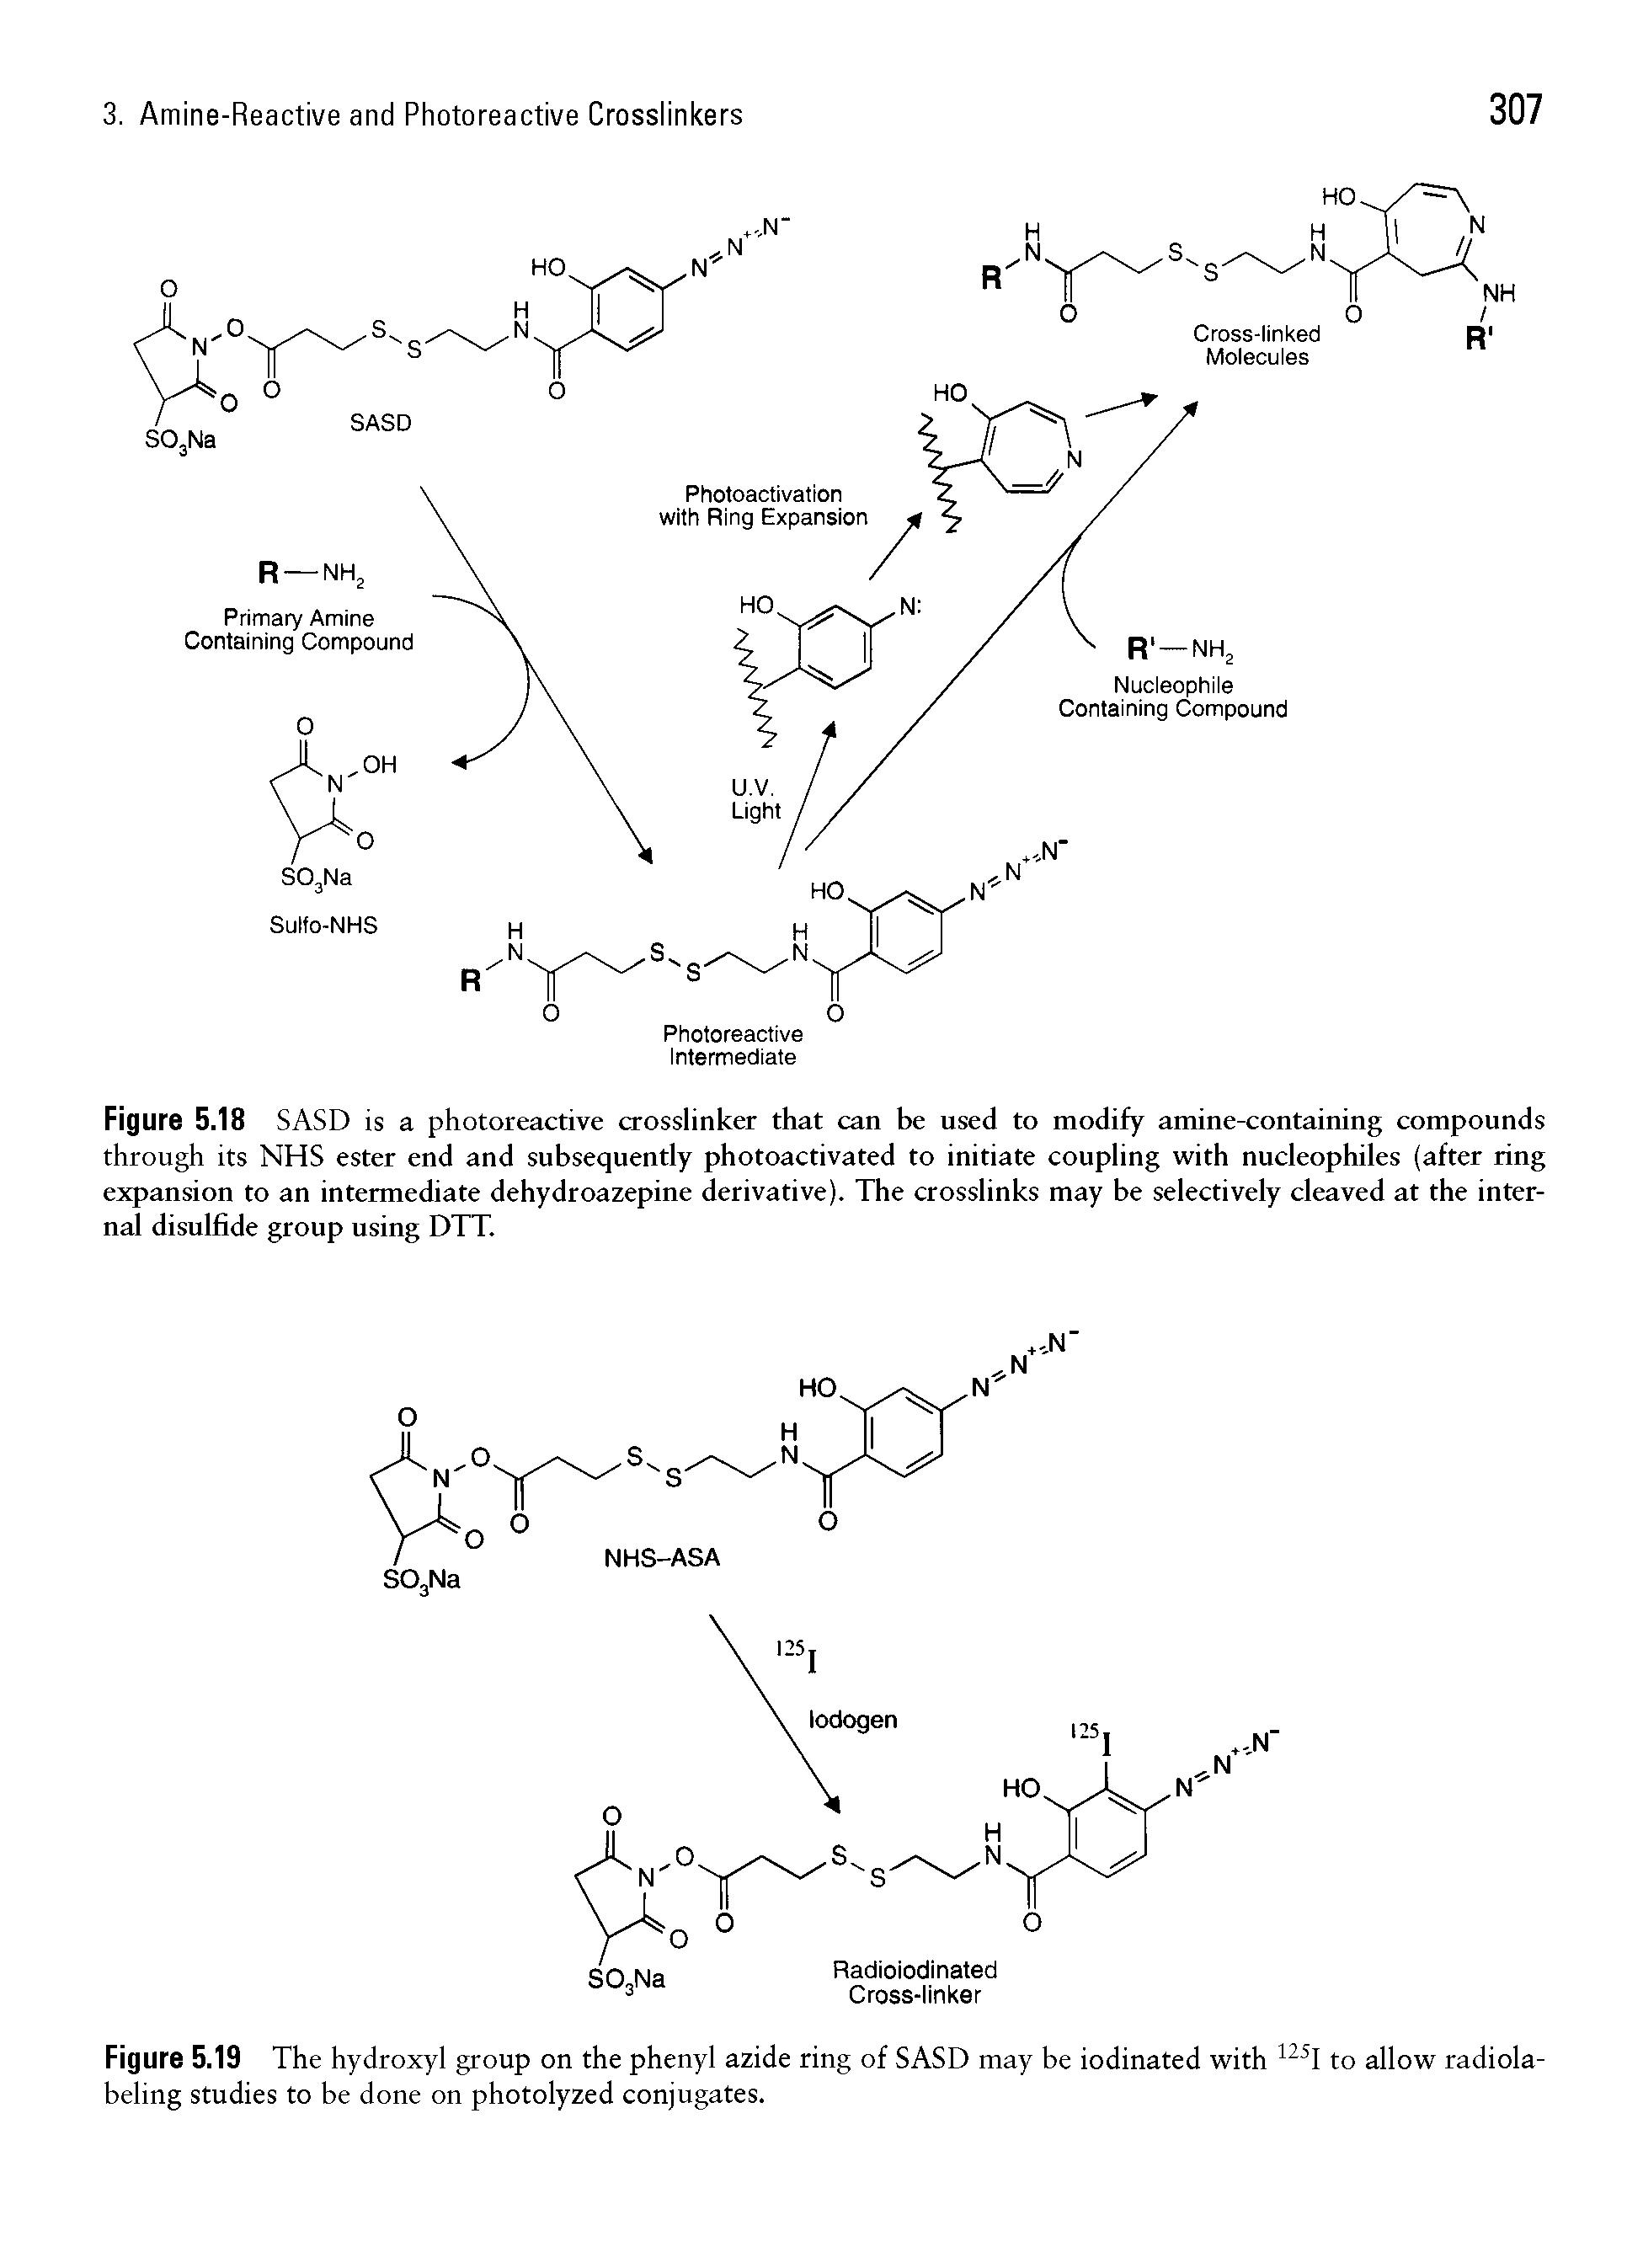 Figure 5.18 SASD is a photoreactive crosslinker that can be used to modify amine-containing compounds through its NHS ester end and subsequently photoactivated to initiate coupling with nucleophiles (after ring expansion to an intermediate dehydroazepine derivative). The crosslinks may be selectively cleaved at the internal disulfide group using DTT.